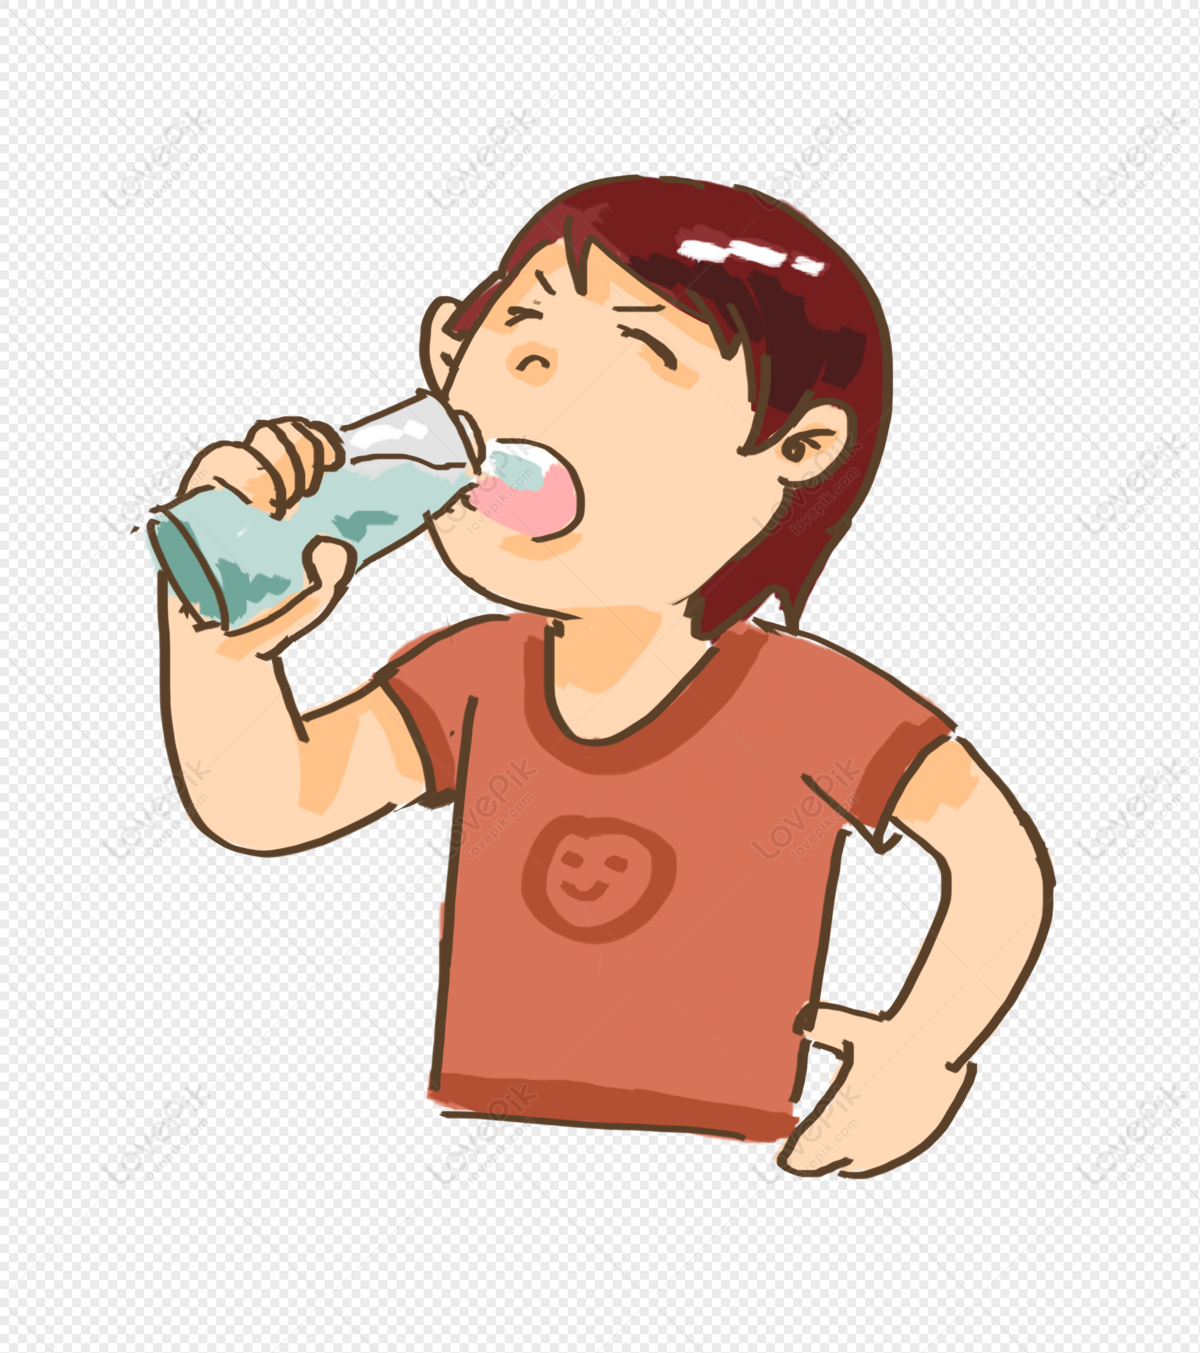 Thirsty Boy Drinking Water PNG Transparent And Clipart Image For Free  Download - Lovepik | 401476866